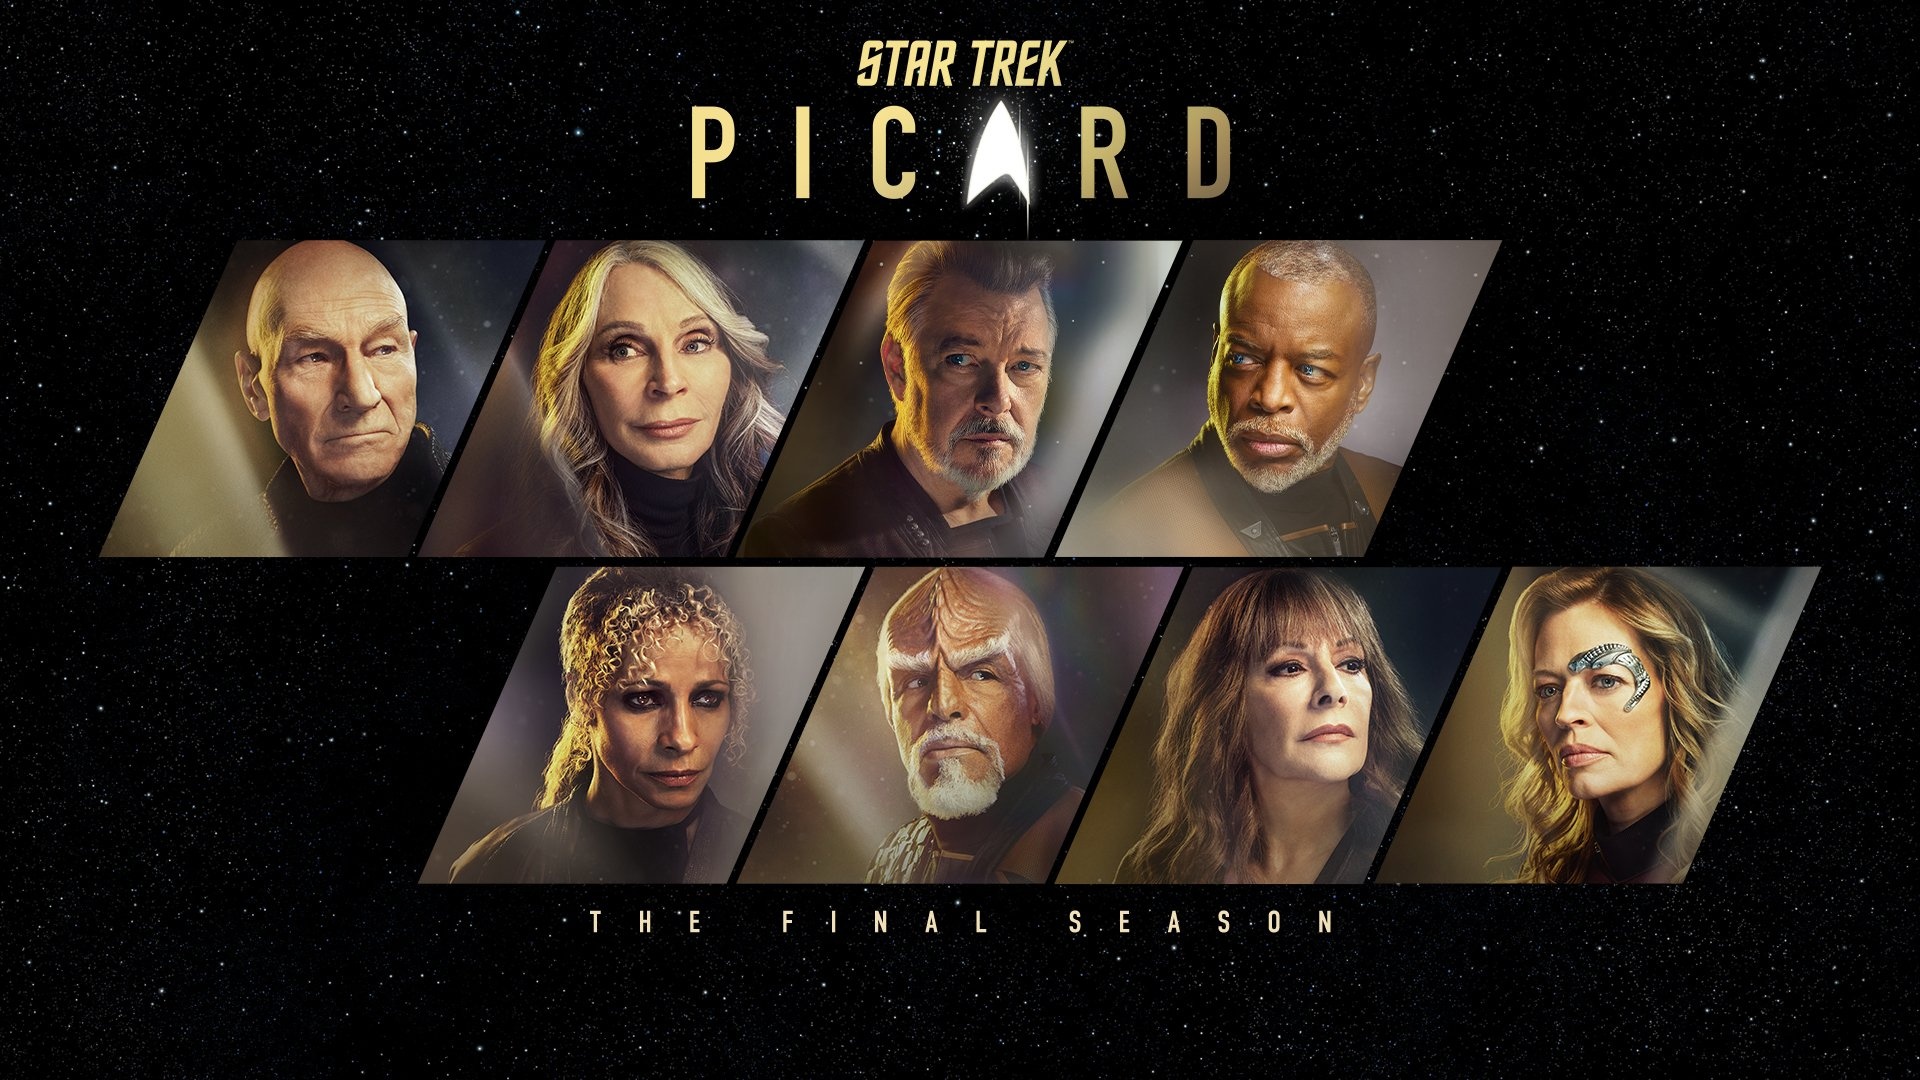 Star Trek: Picard, Iconic character posters, Return of the old crew, Seriesly awesome, 1920x1080 Full HD Desktop